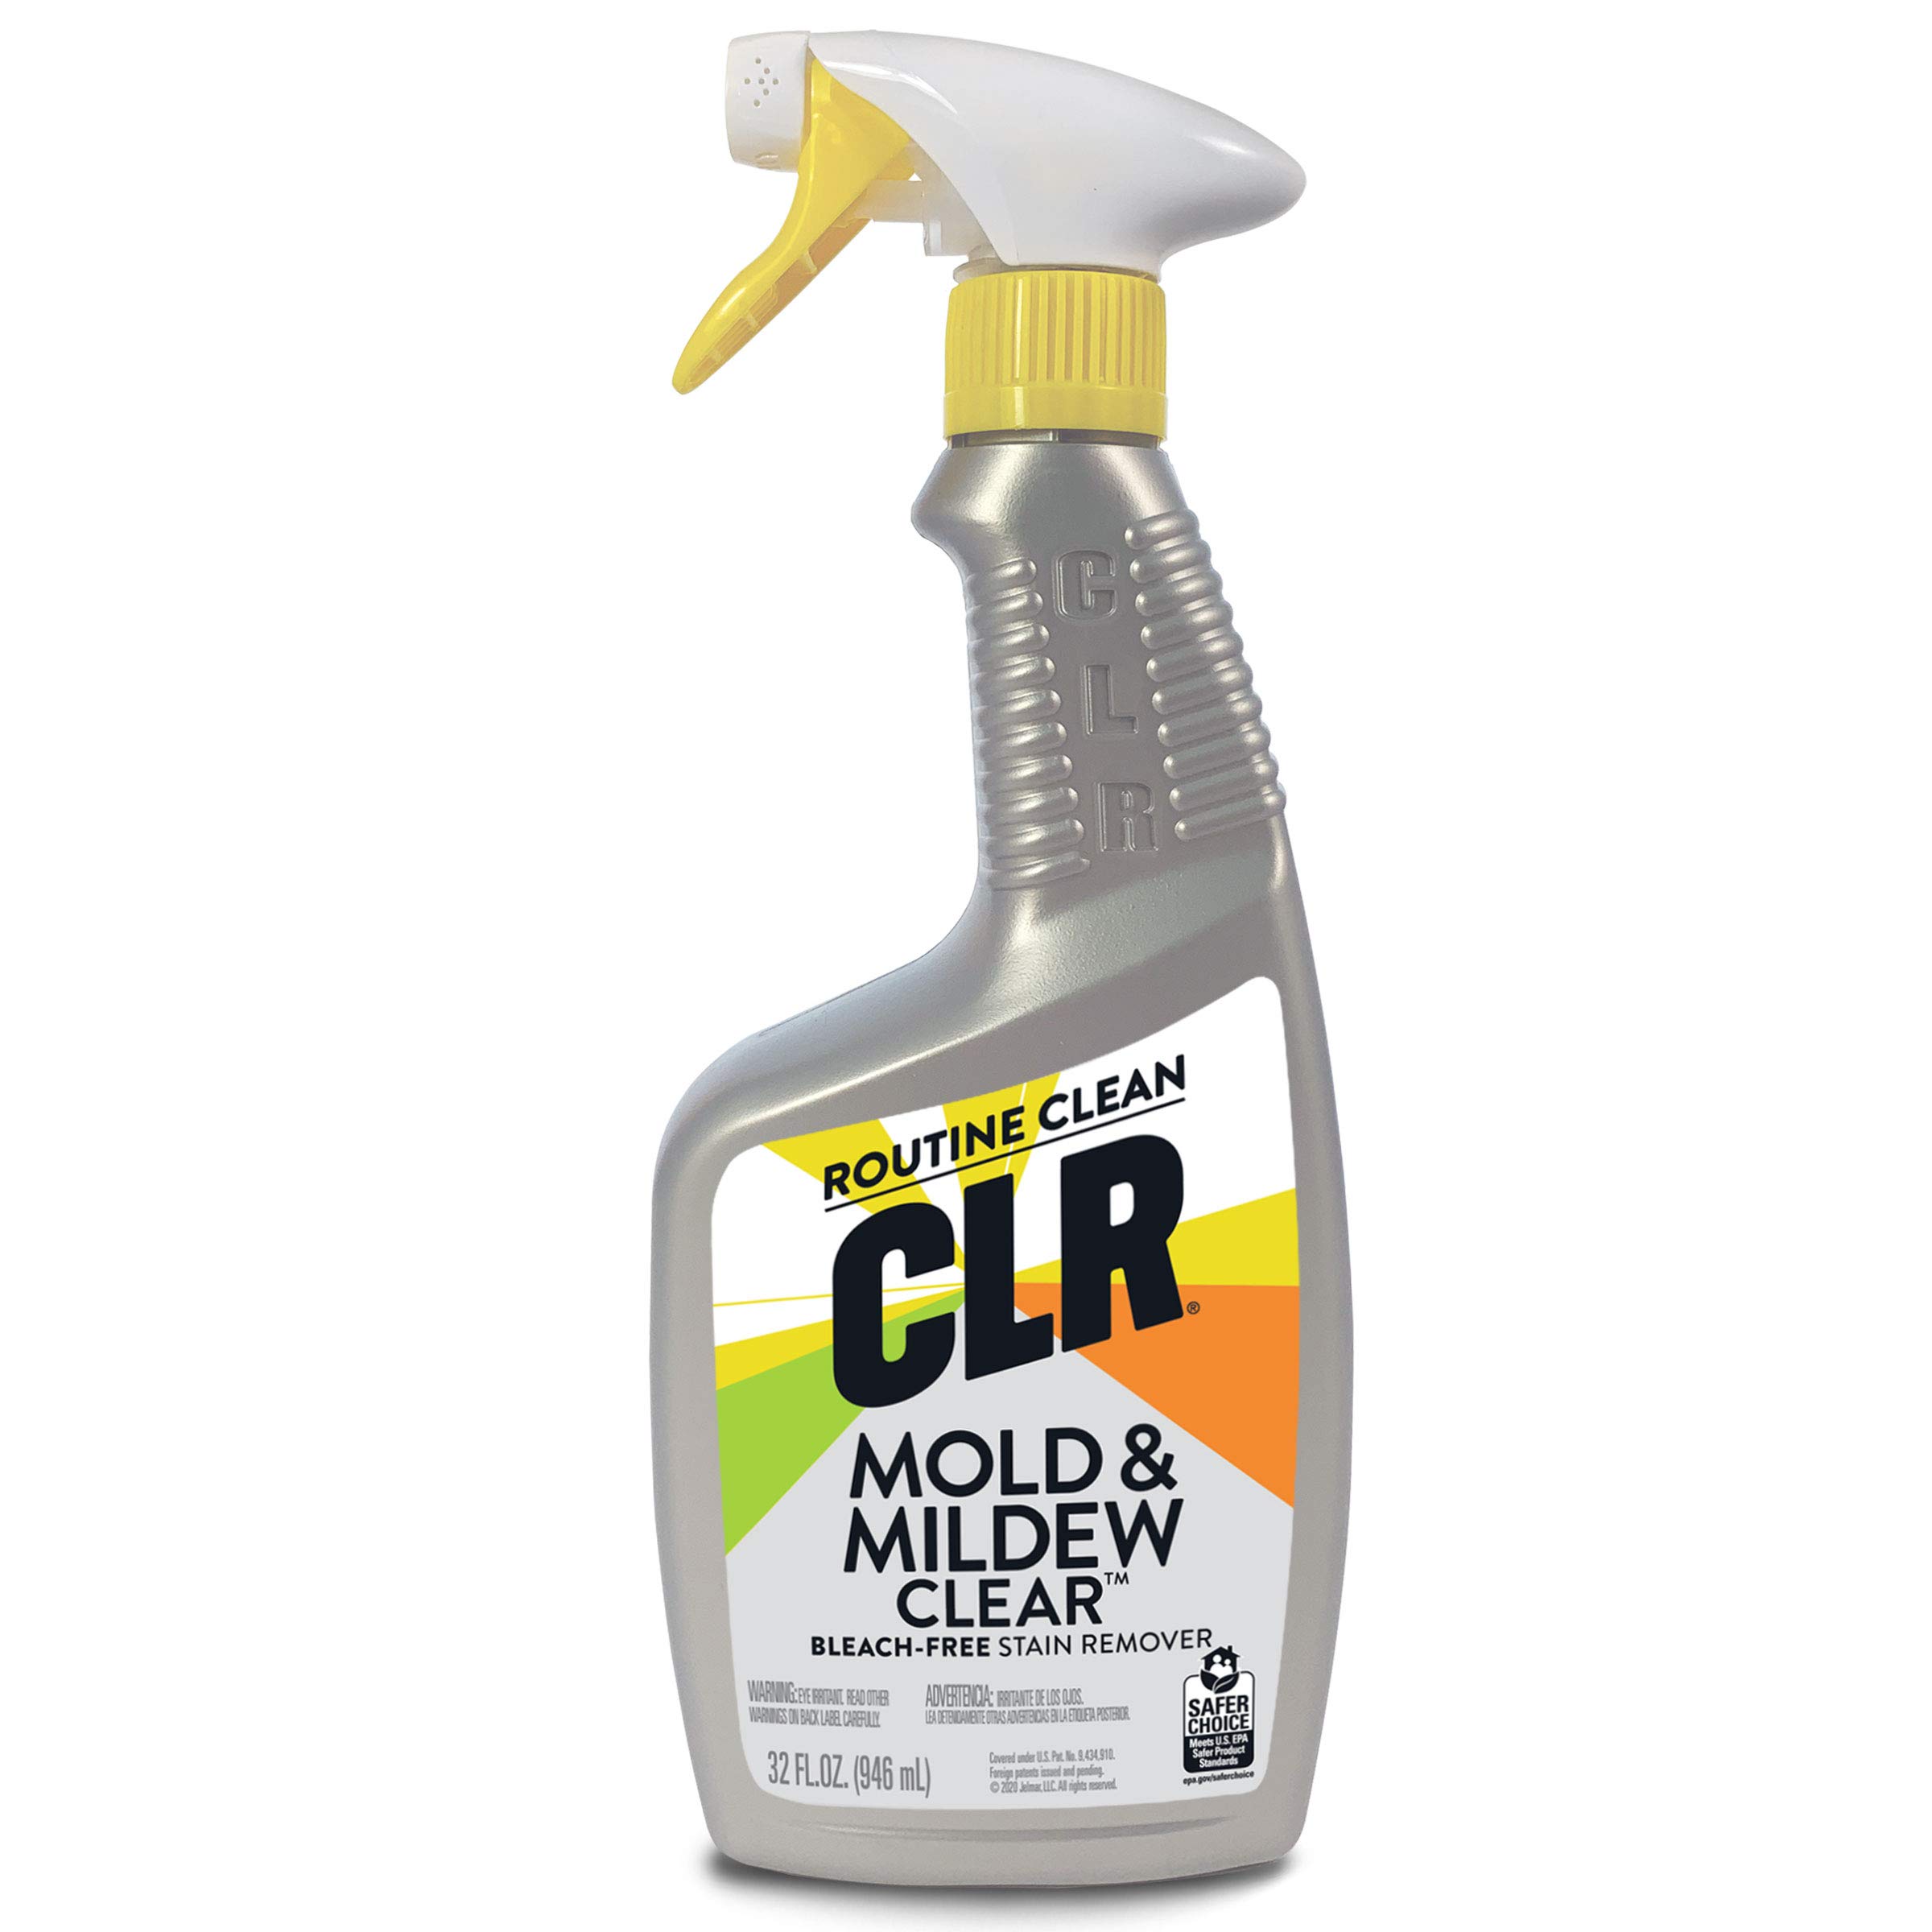 CLR Mold & Mildew Clear, Bleach-Free Stain Remover Spray